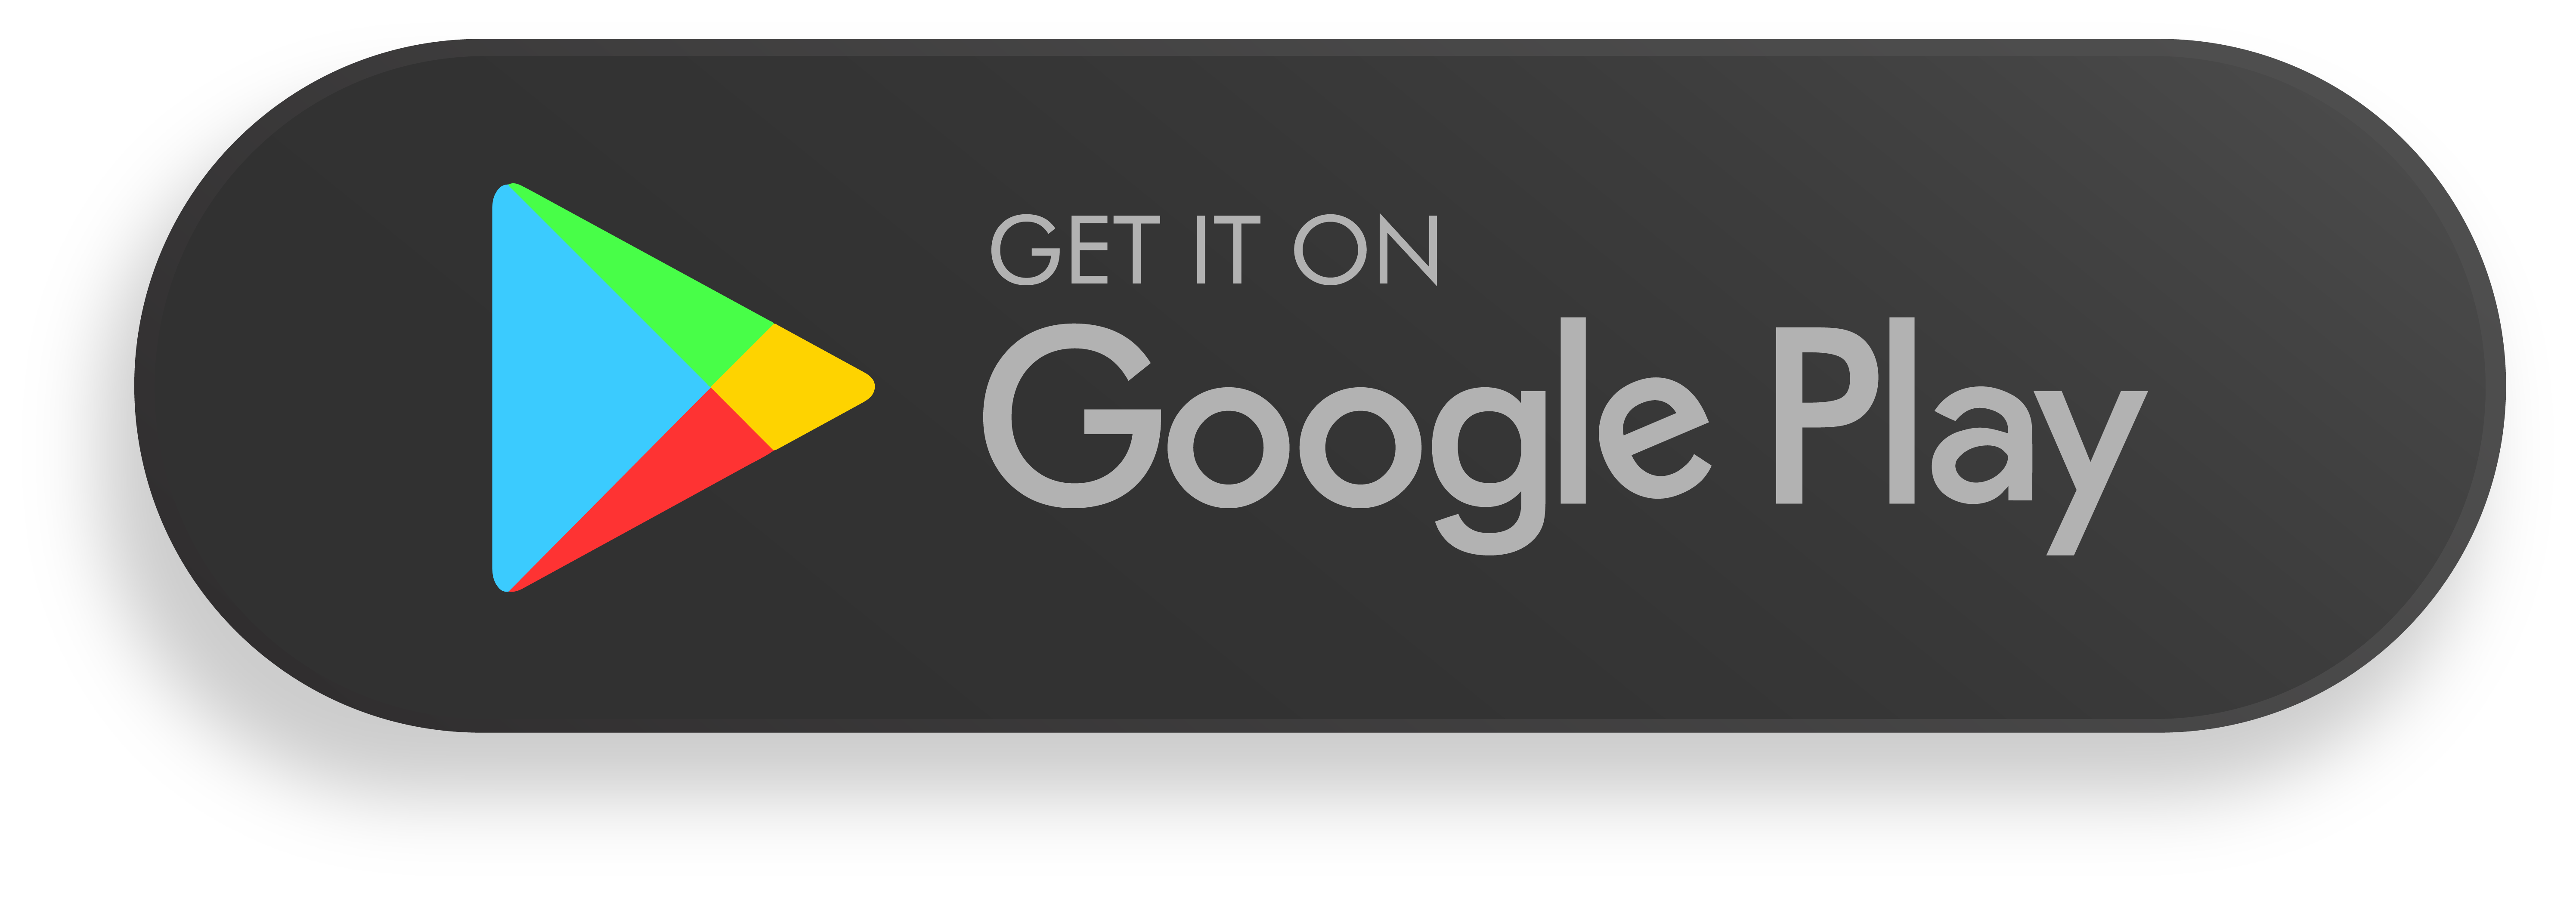 Google Store Logo, Investor Relations, Stock Promoter, Awareness, Campaign